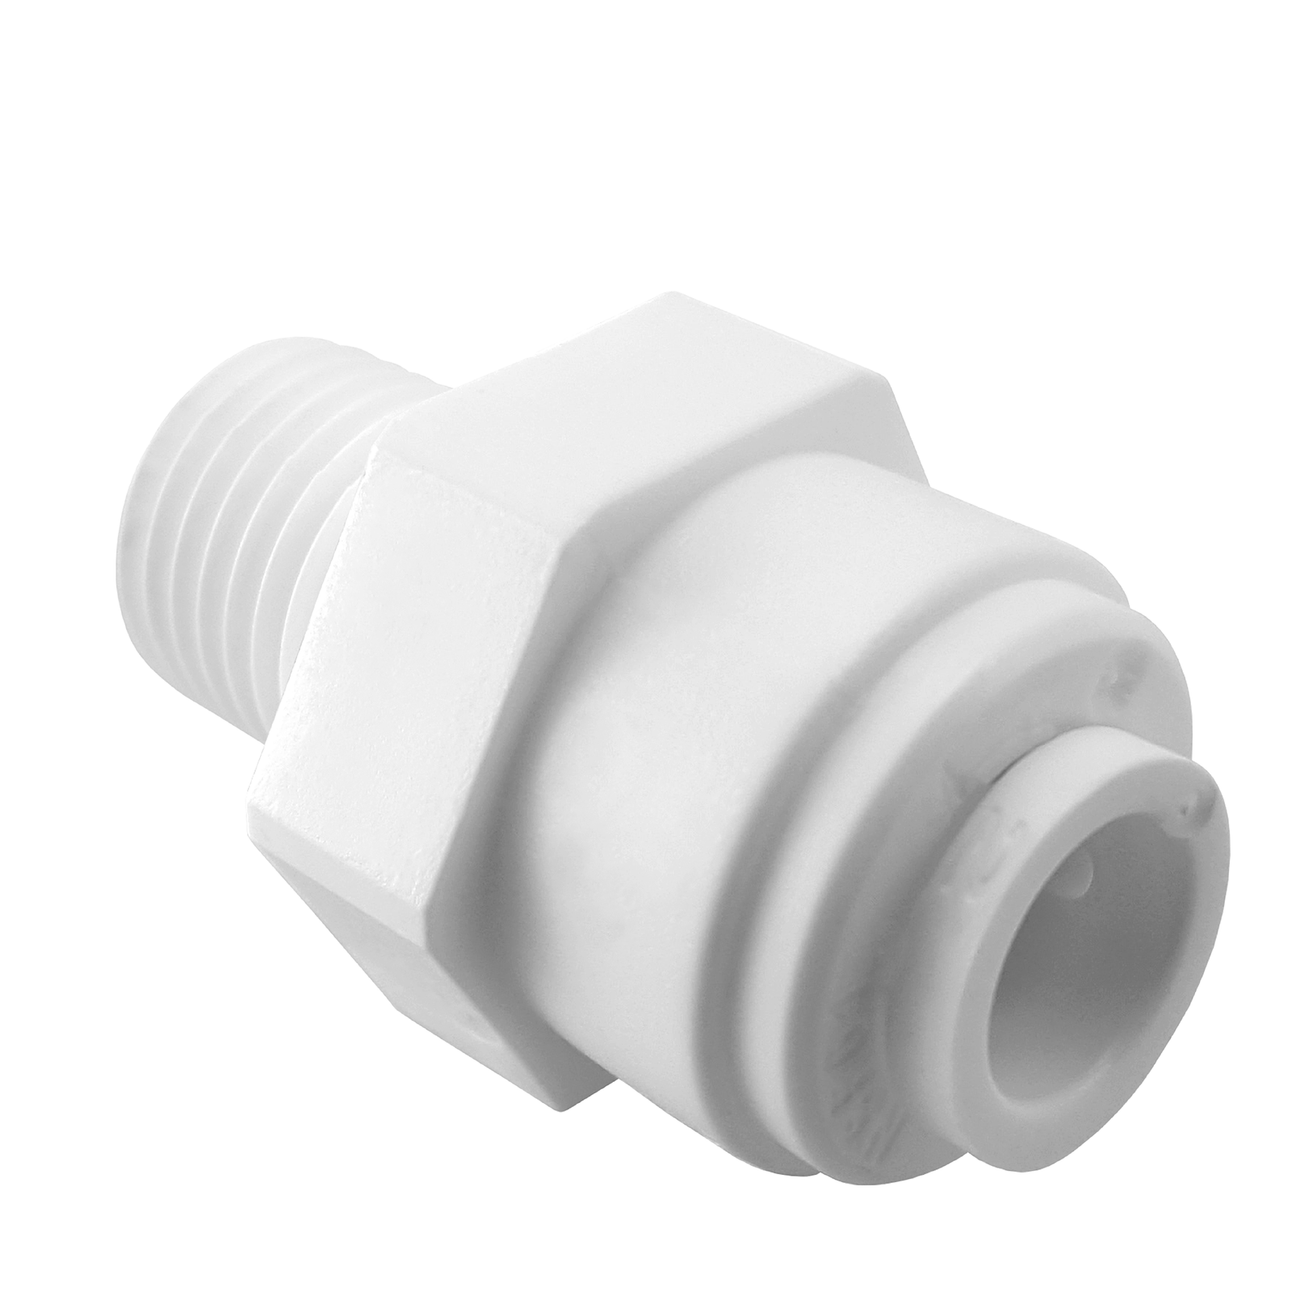 Male Connector - dev-express-water